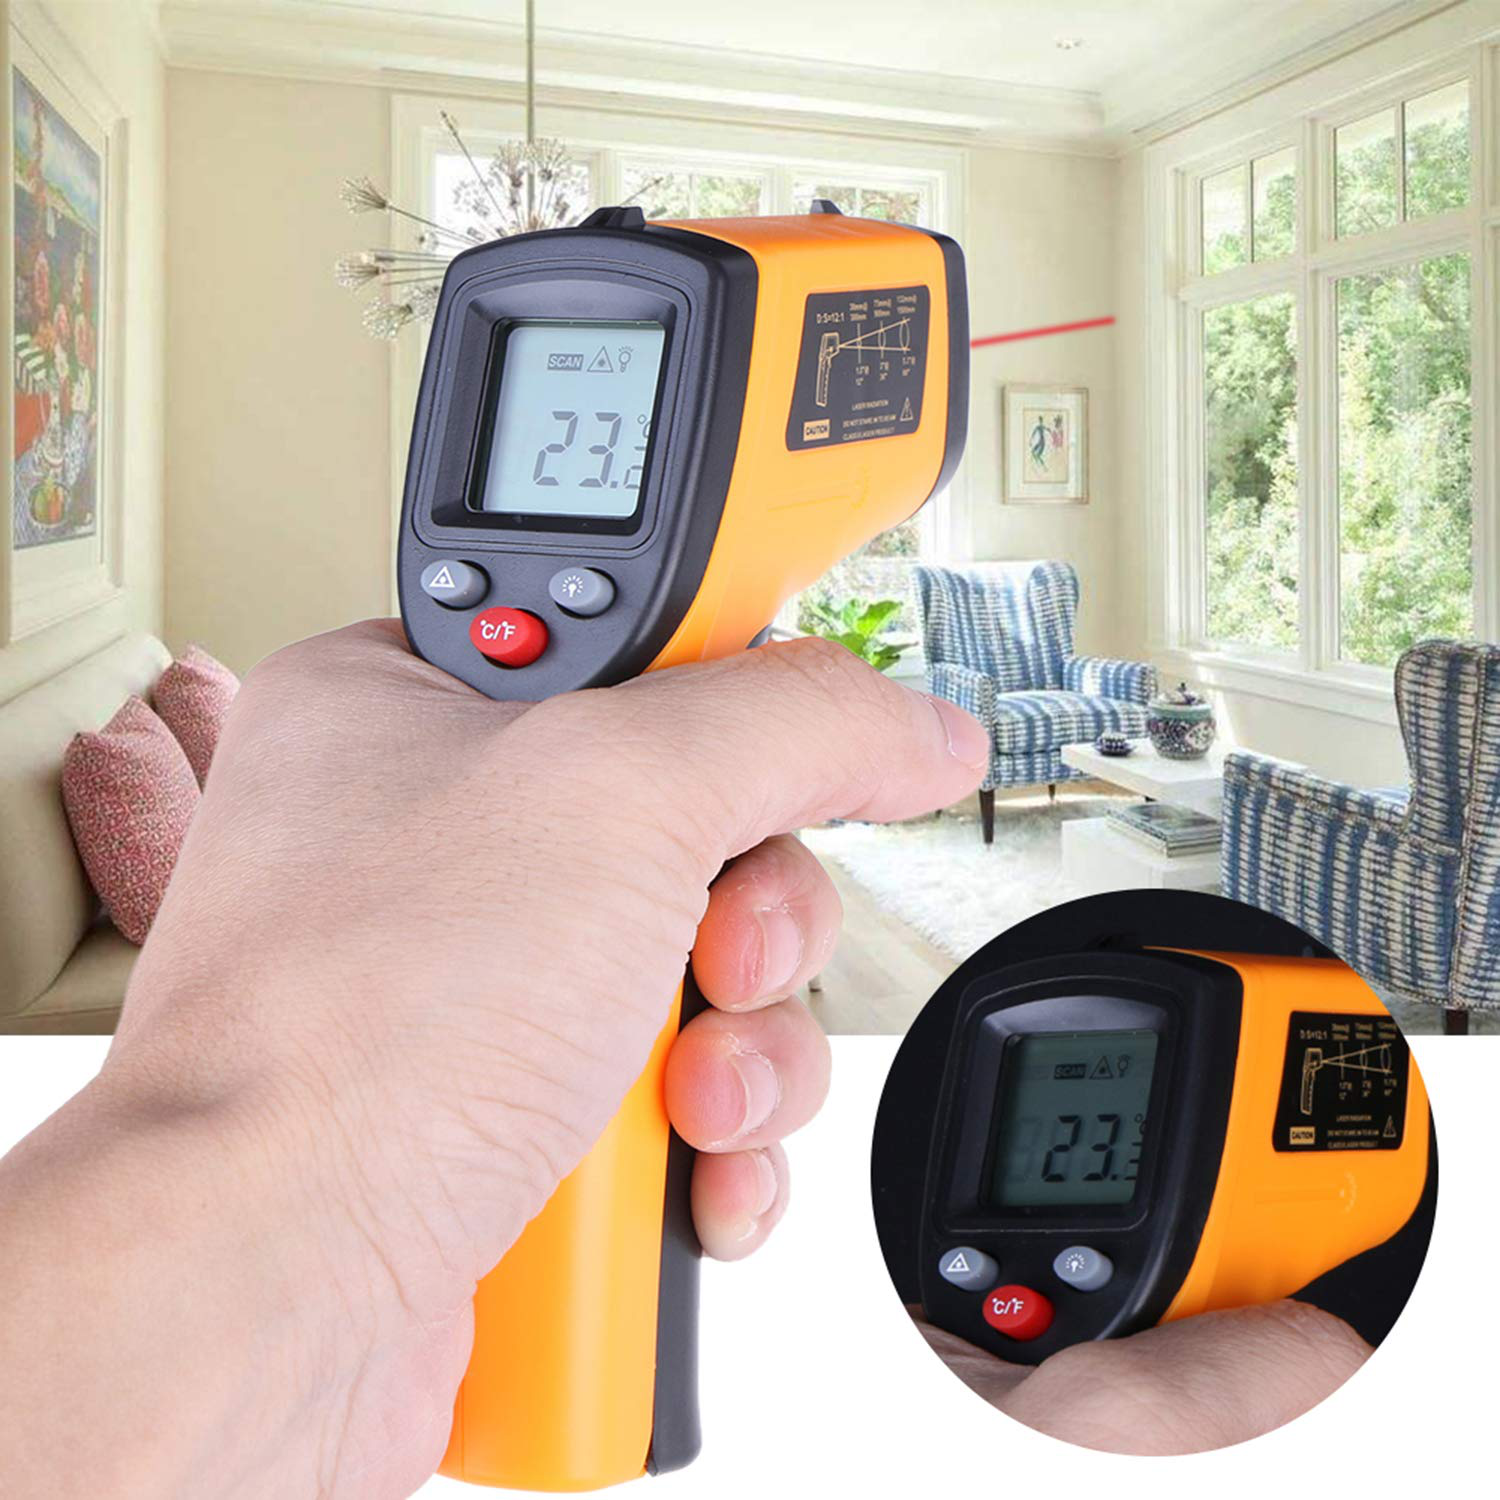 Goolrc Digital Infrared Thermometer Laser Temperature Gun -50-380°C/-58℉-716℉ Non-Contact with Backlight 